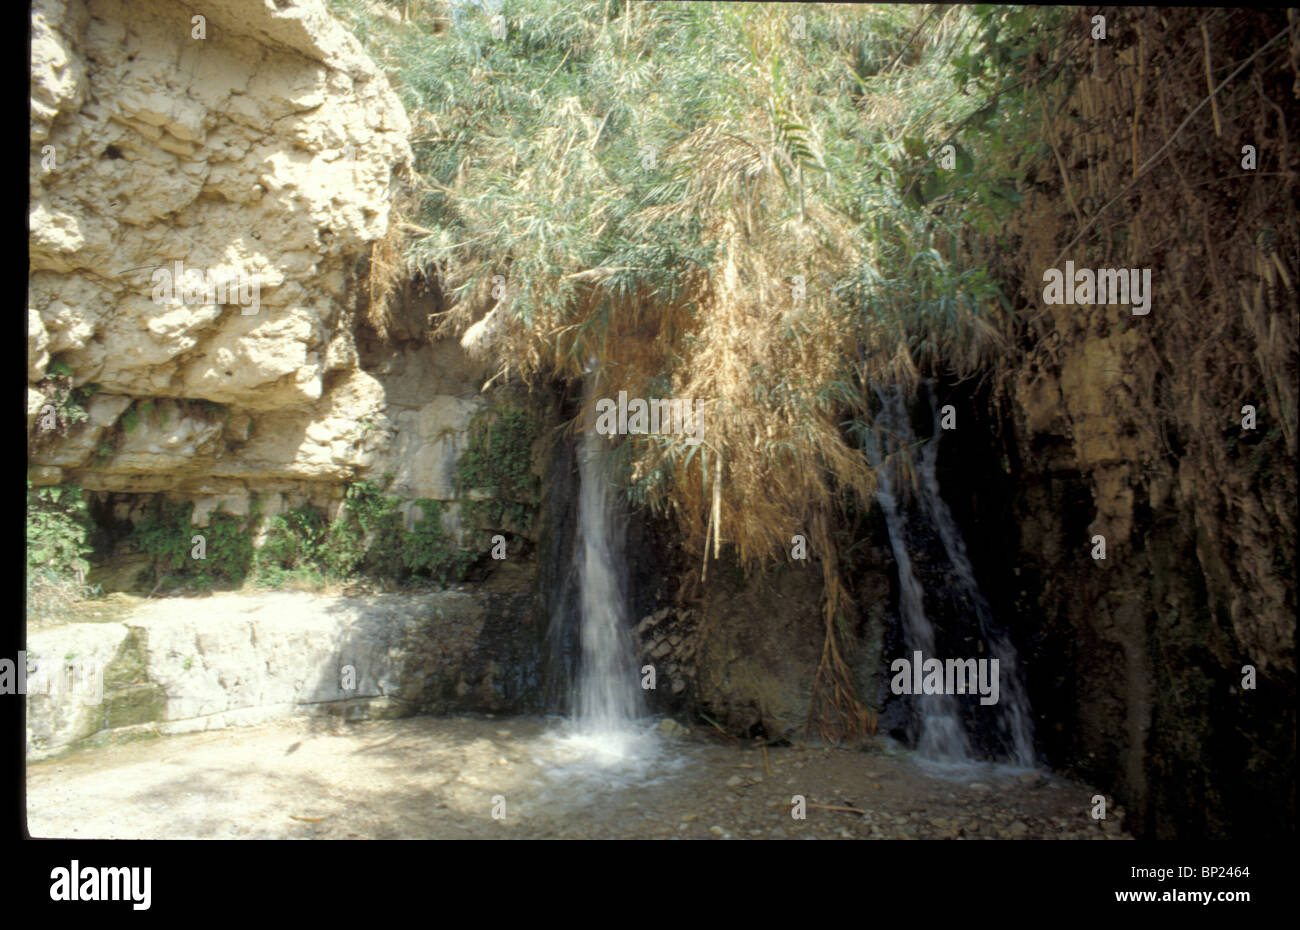 EIN GEDI - TOWN (TODAY A KIBUTZ & NATURE RESERVE) ON THE WESTERN SHORE OF THE DEAD SEA NEAR THE WILDERNESS OF JUDEA IN WHICH Stock Photo